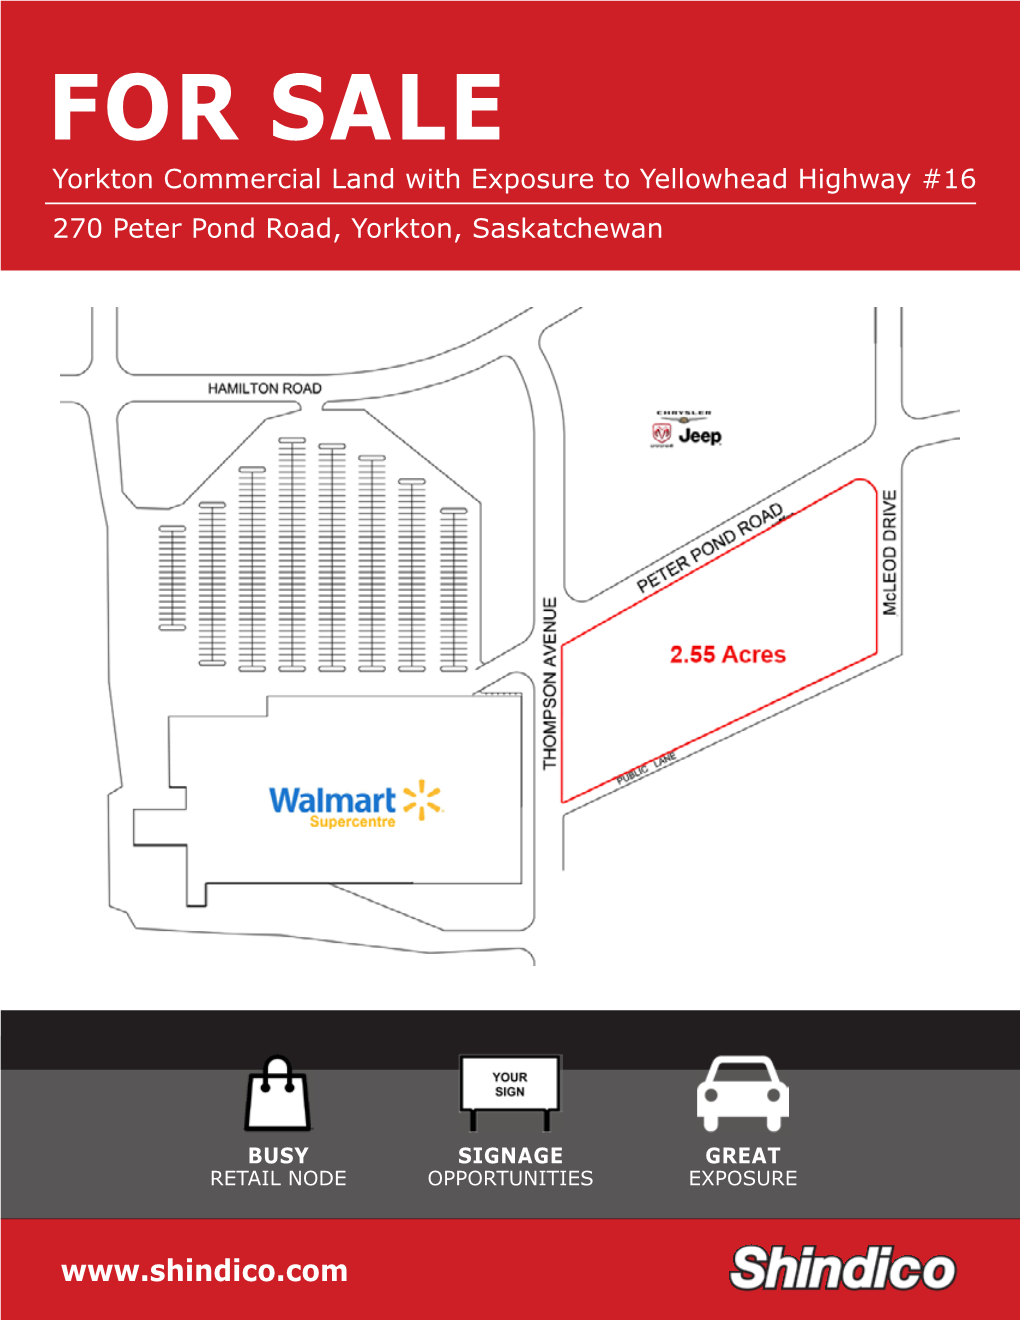 FOR SALE Yorkton Commercial Land with Exposure to Yellowhead Highway #16 270 Peter Pond Road, Yorkton, Saskatchewan